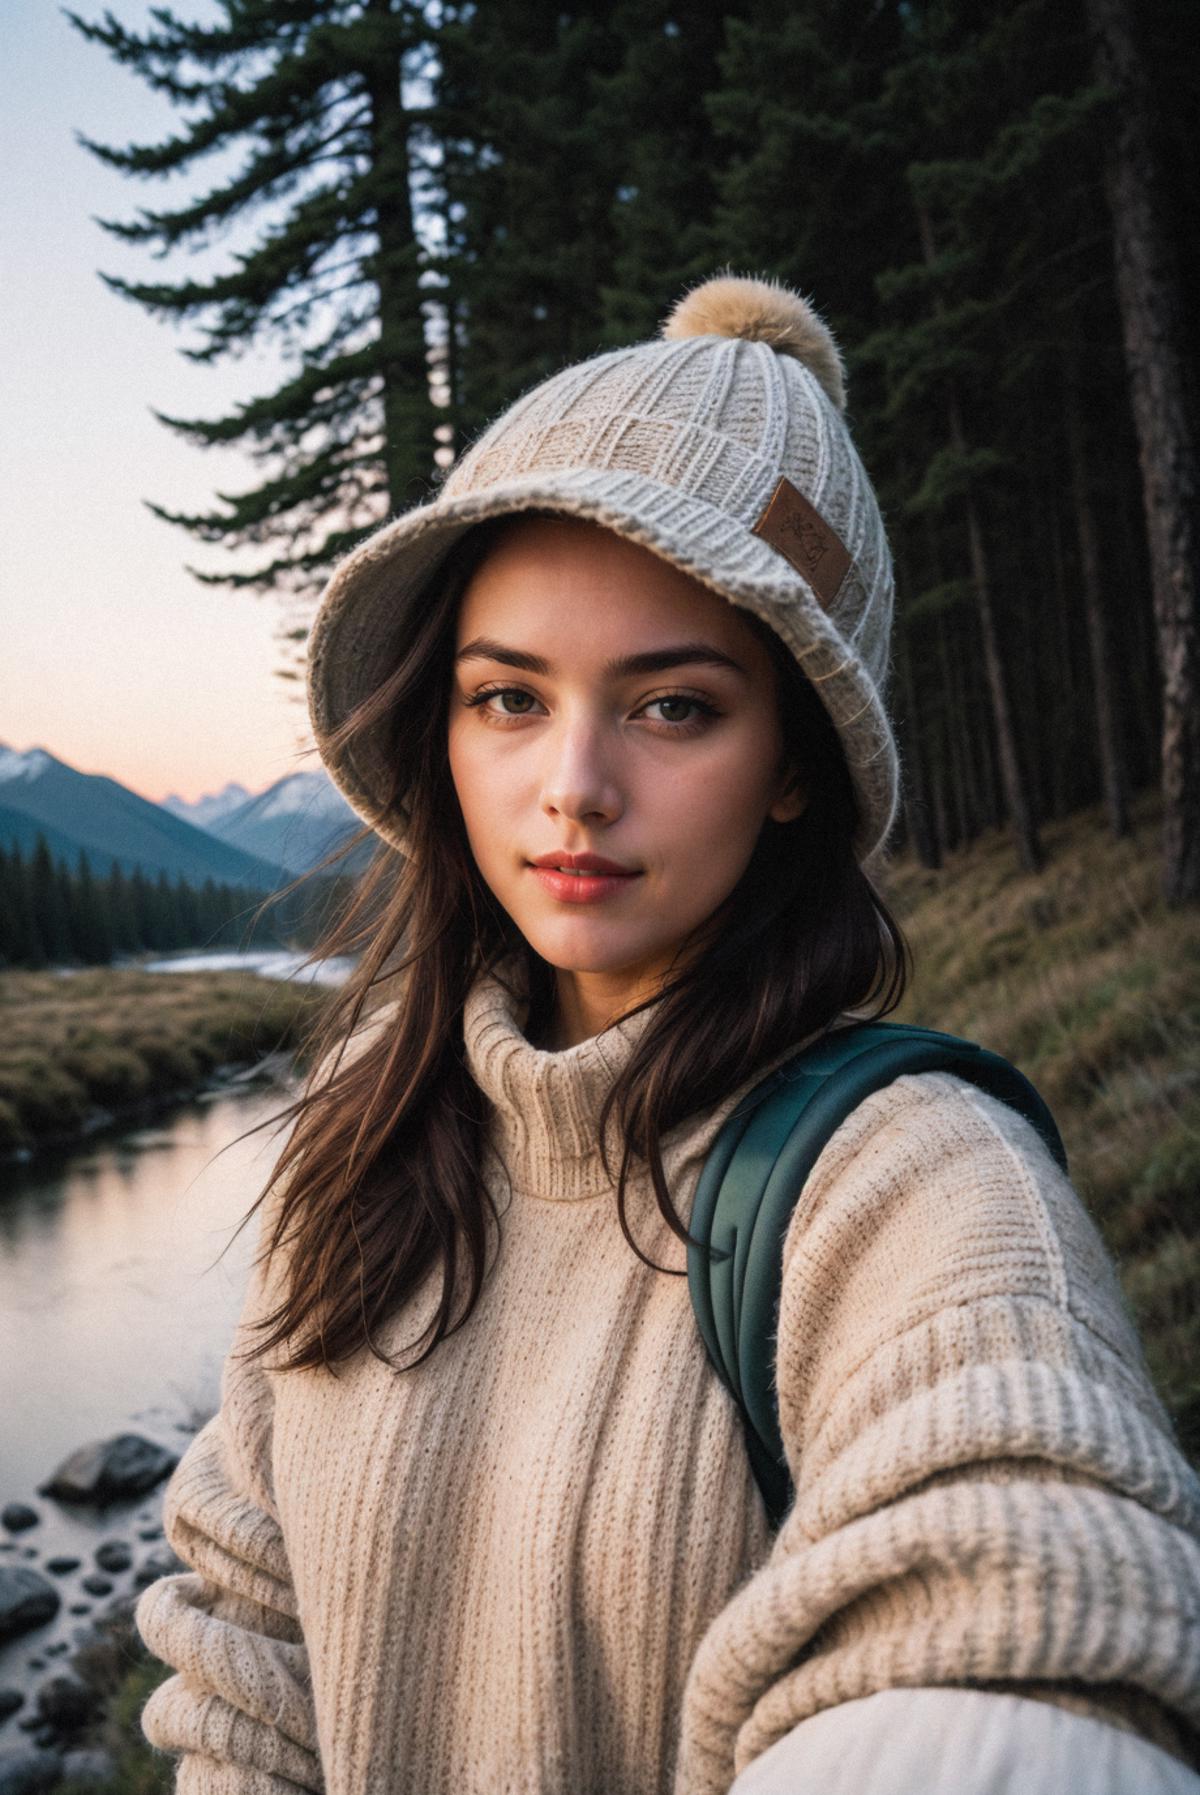 A woman in a beanie and sweater with a backpack on the side of a mountain.